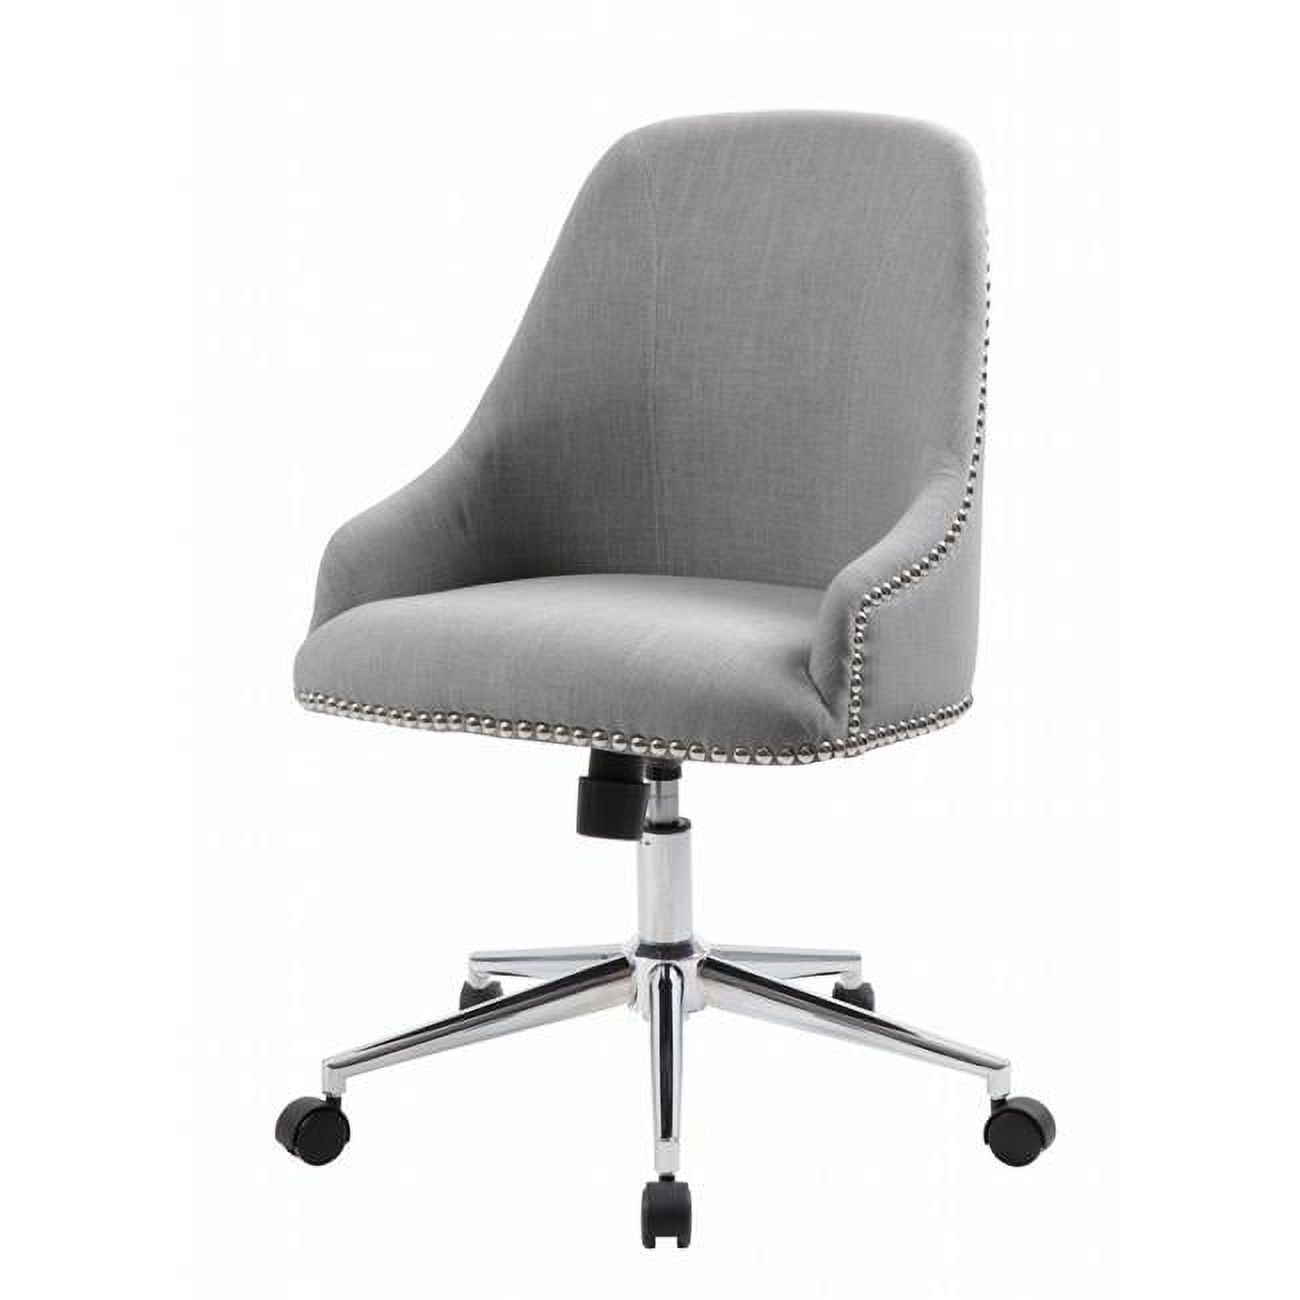 B516c-gy Grey Chair With Silver Nail Around Back & Arm, Kd074 Base